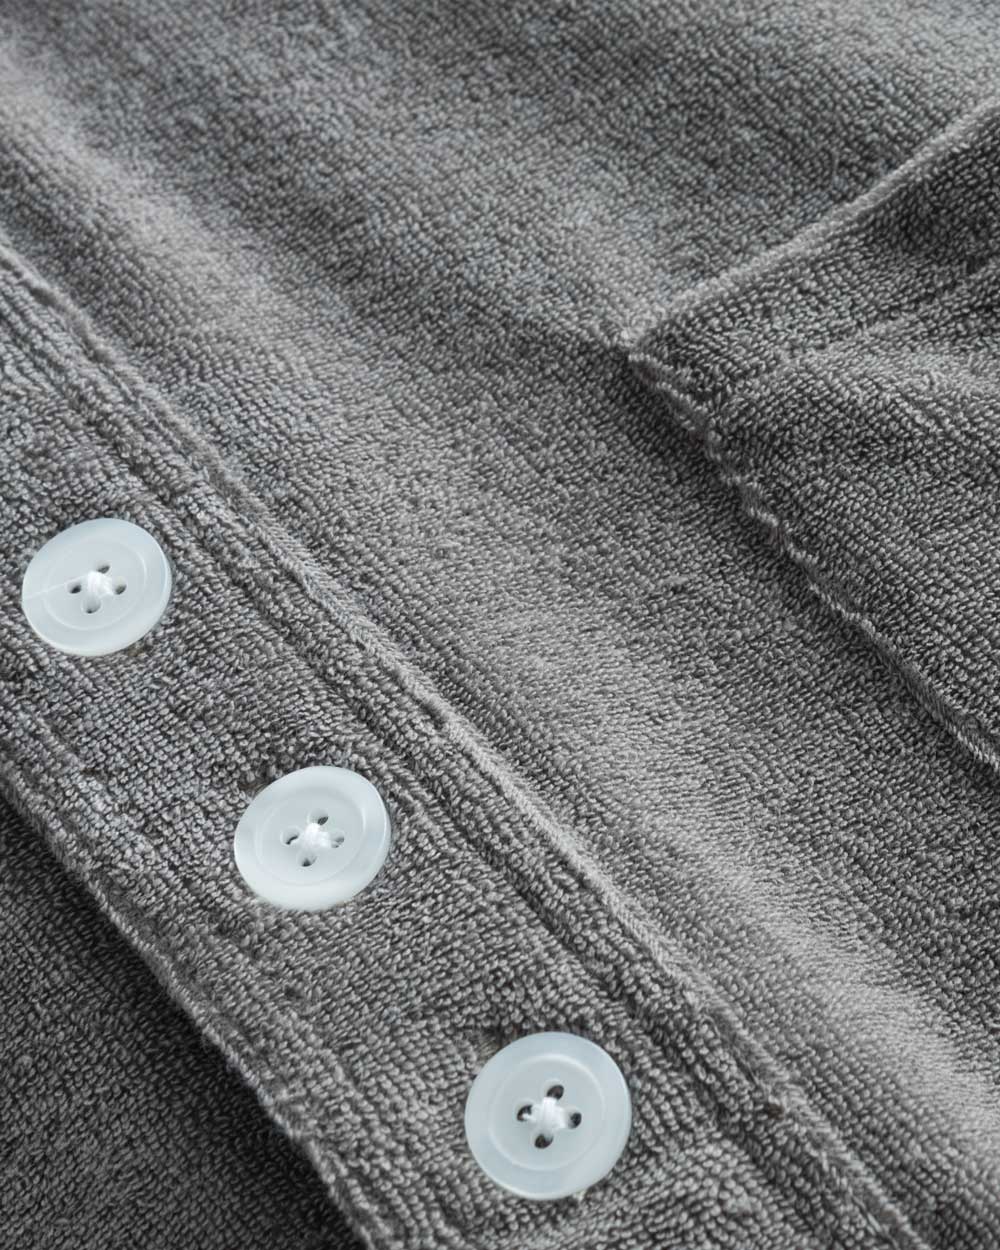 Close up of white buttons on grey shirt